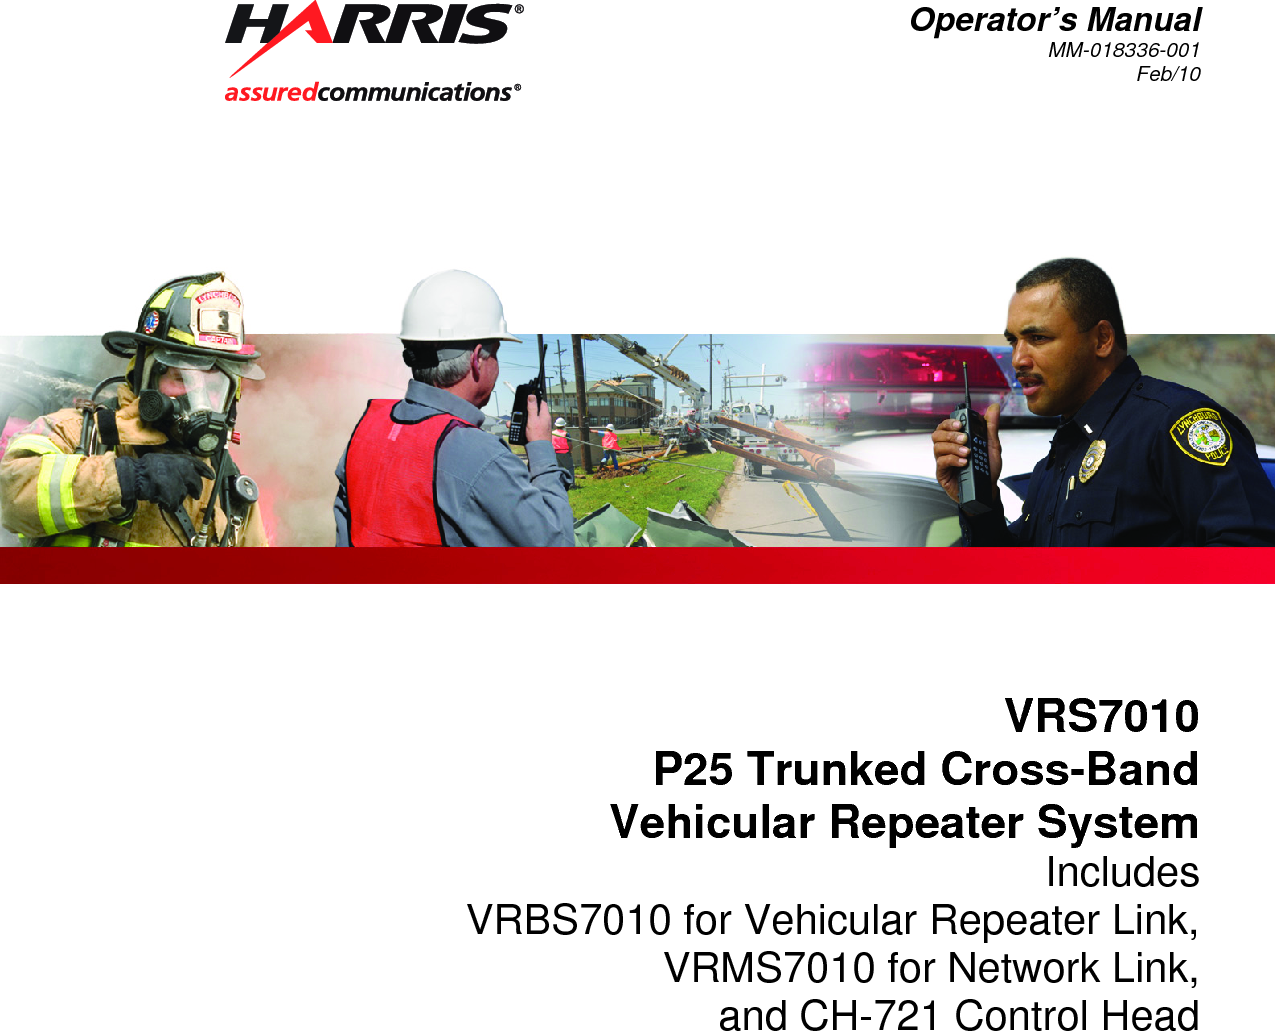 Operator’s Manual MM-018336-001 Feb/10  VRS7010 P25 Trunked Cross-Band Vehicular Repeater System Includes VRBS7010 for Vehicular Repeater Link, VRMS7010 for Network Link, and CH-721 Control Head  